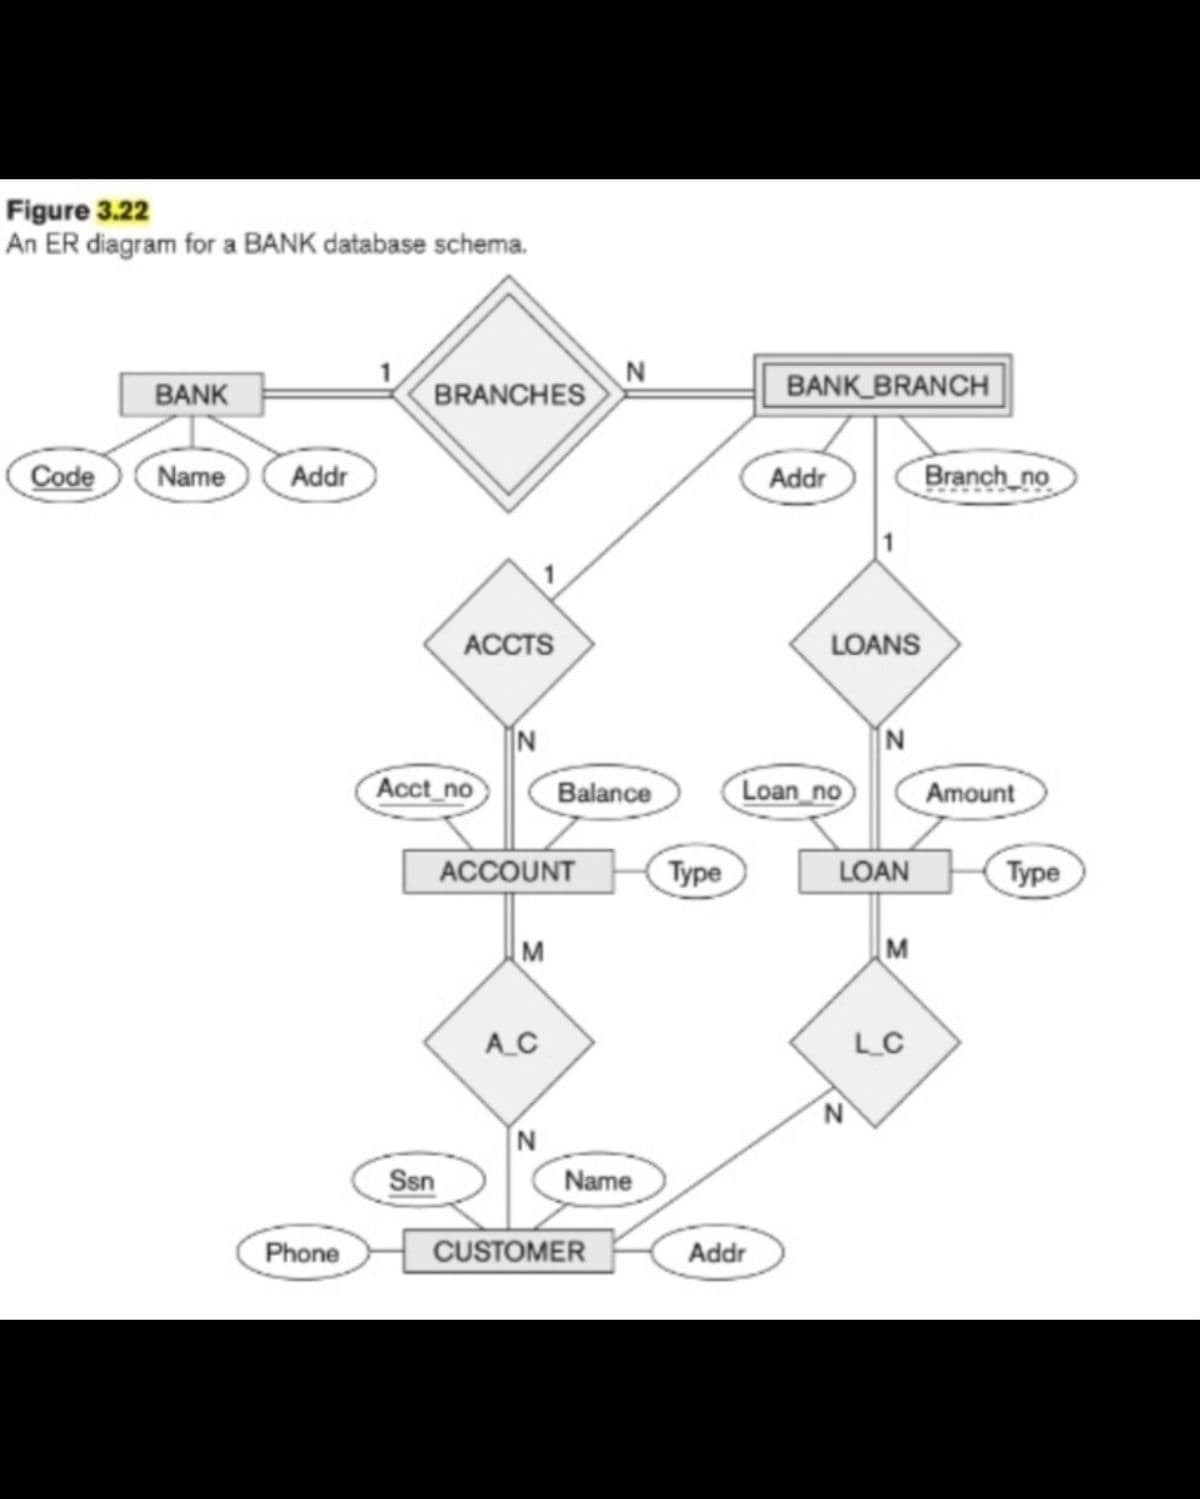 Figure 3.22
An ER diagram for a BANK database schema.
BANK
Code Name
Addr
Phone
BRANCHES
ACCTS
Acct_no
Ssn
N
ACCOUNT
M
A_C
N
Balance
N
Name
CUSTOMER
Type
BANK BRANCH
Addr
Addr
Loan no
LOANS
1
N
N
LOAN
M
L_C
Branch no
Amount
Type